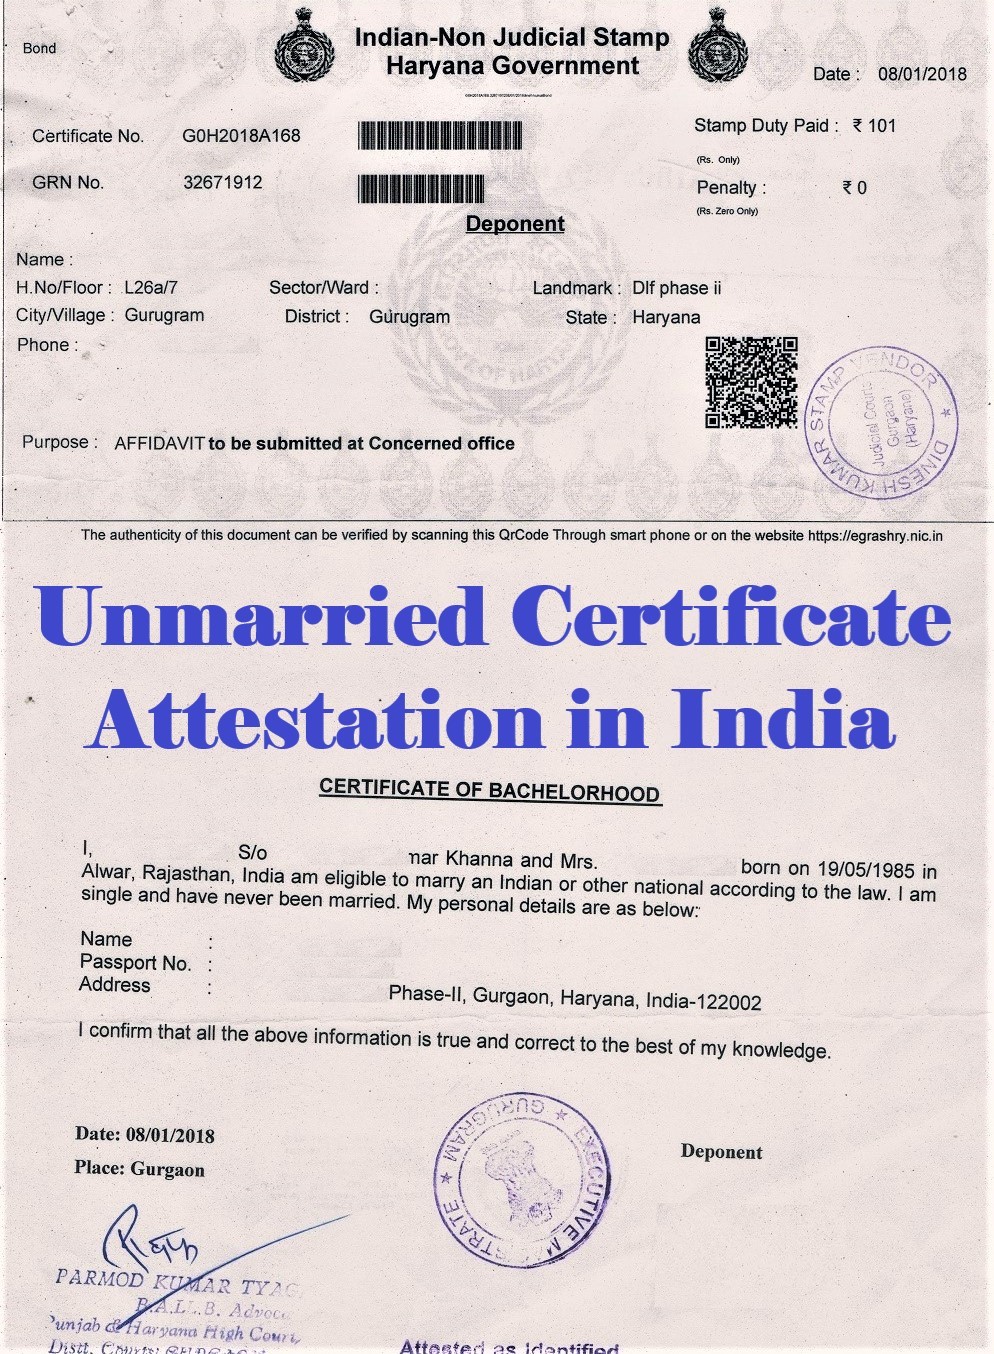 Unmarried Certificate Attestation from Botswana Embassy